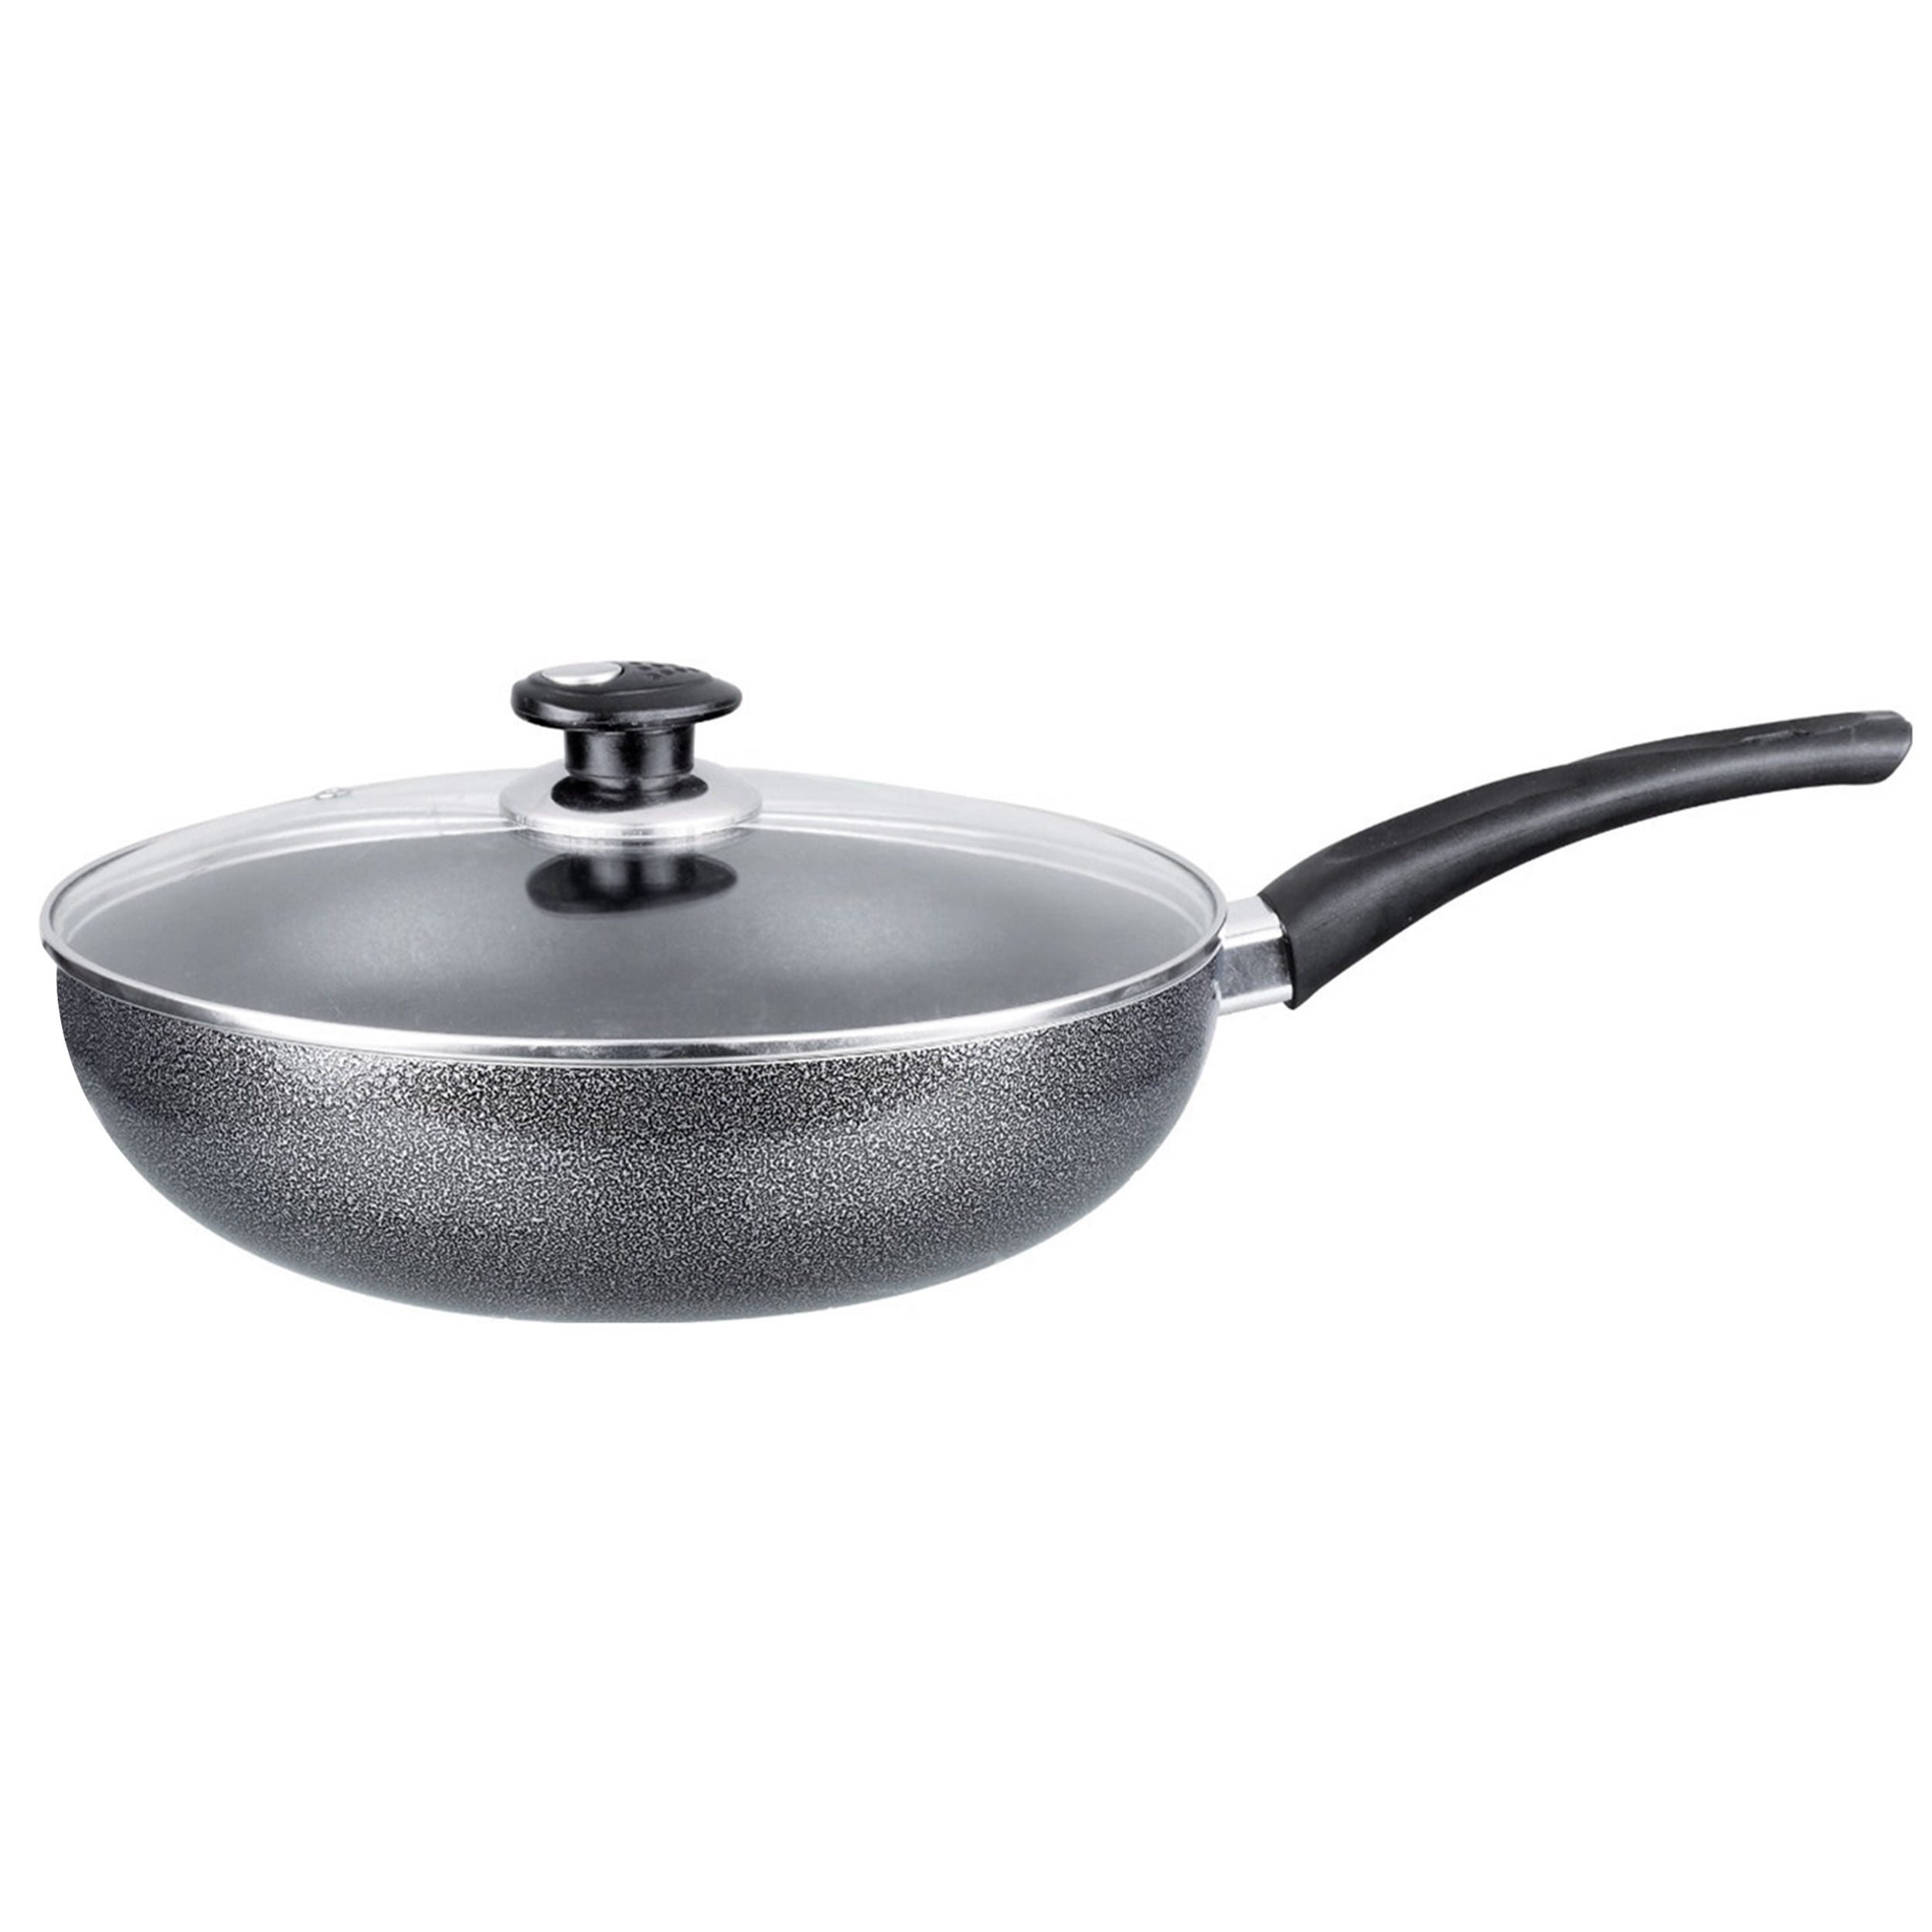 Aluminum 14 Inch Low Pot Cookware Deep Cooking Non Stick Coating Wide Wok Style 